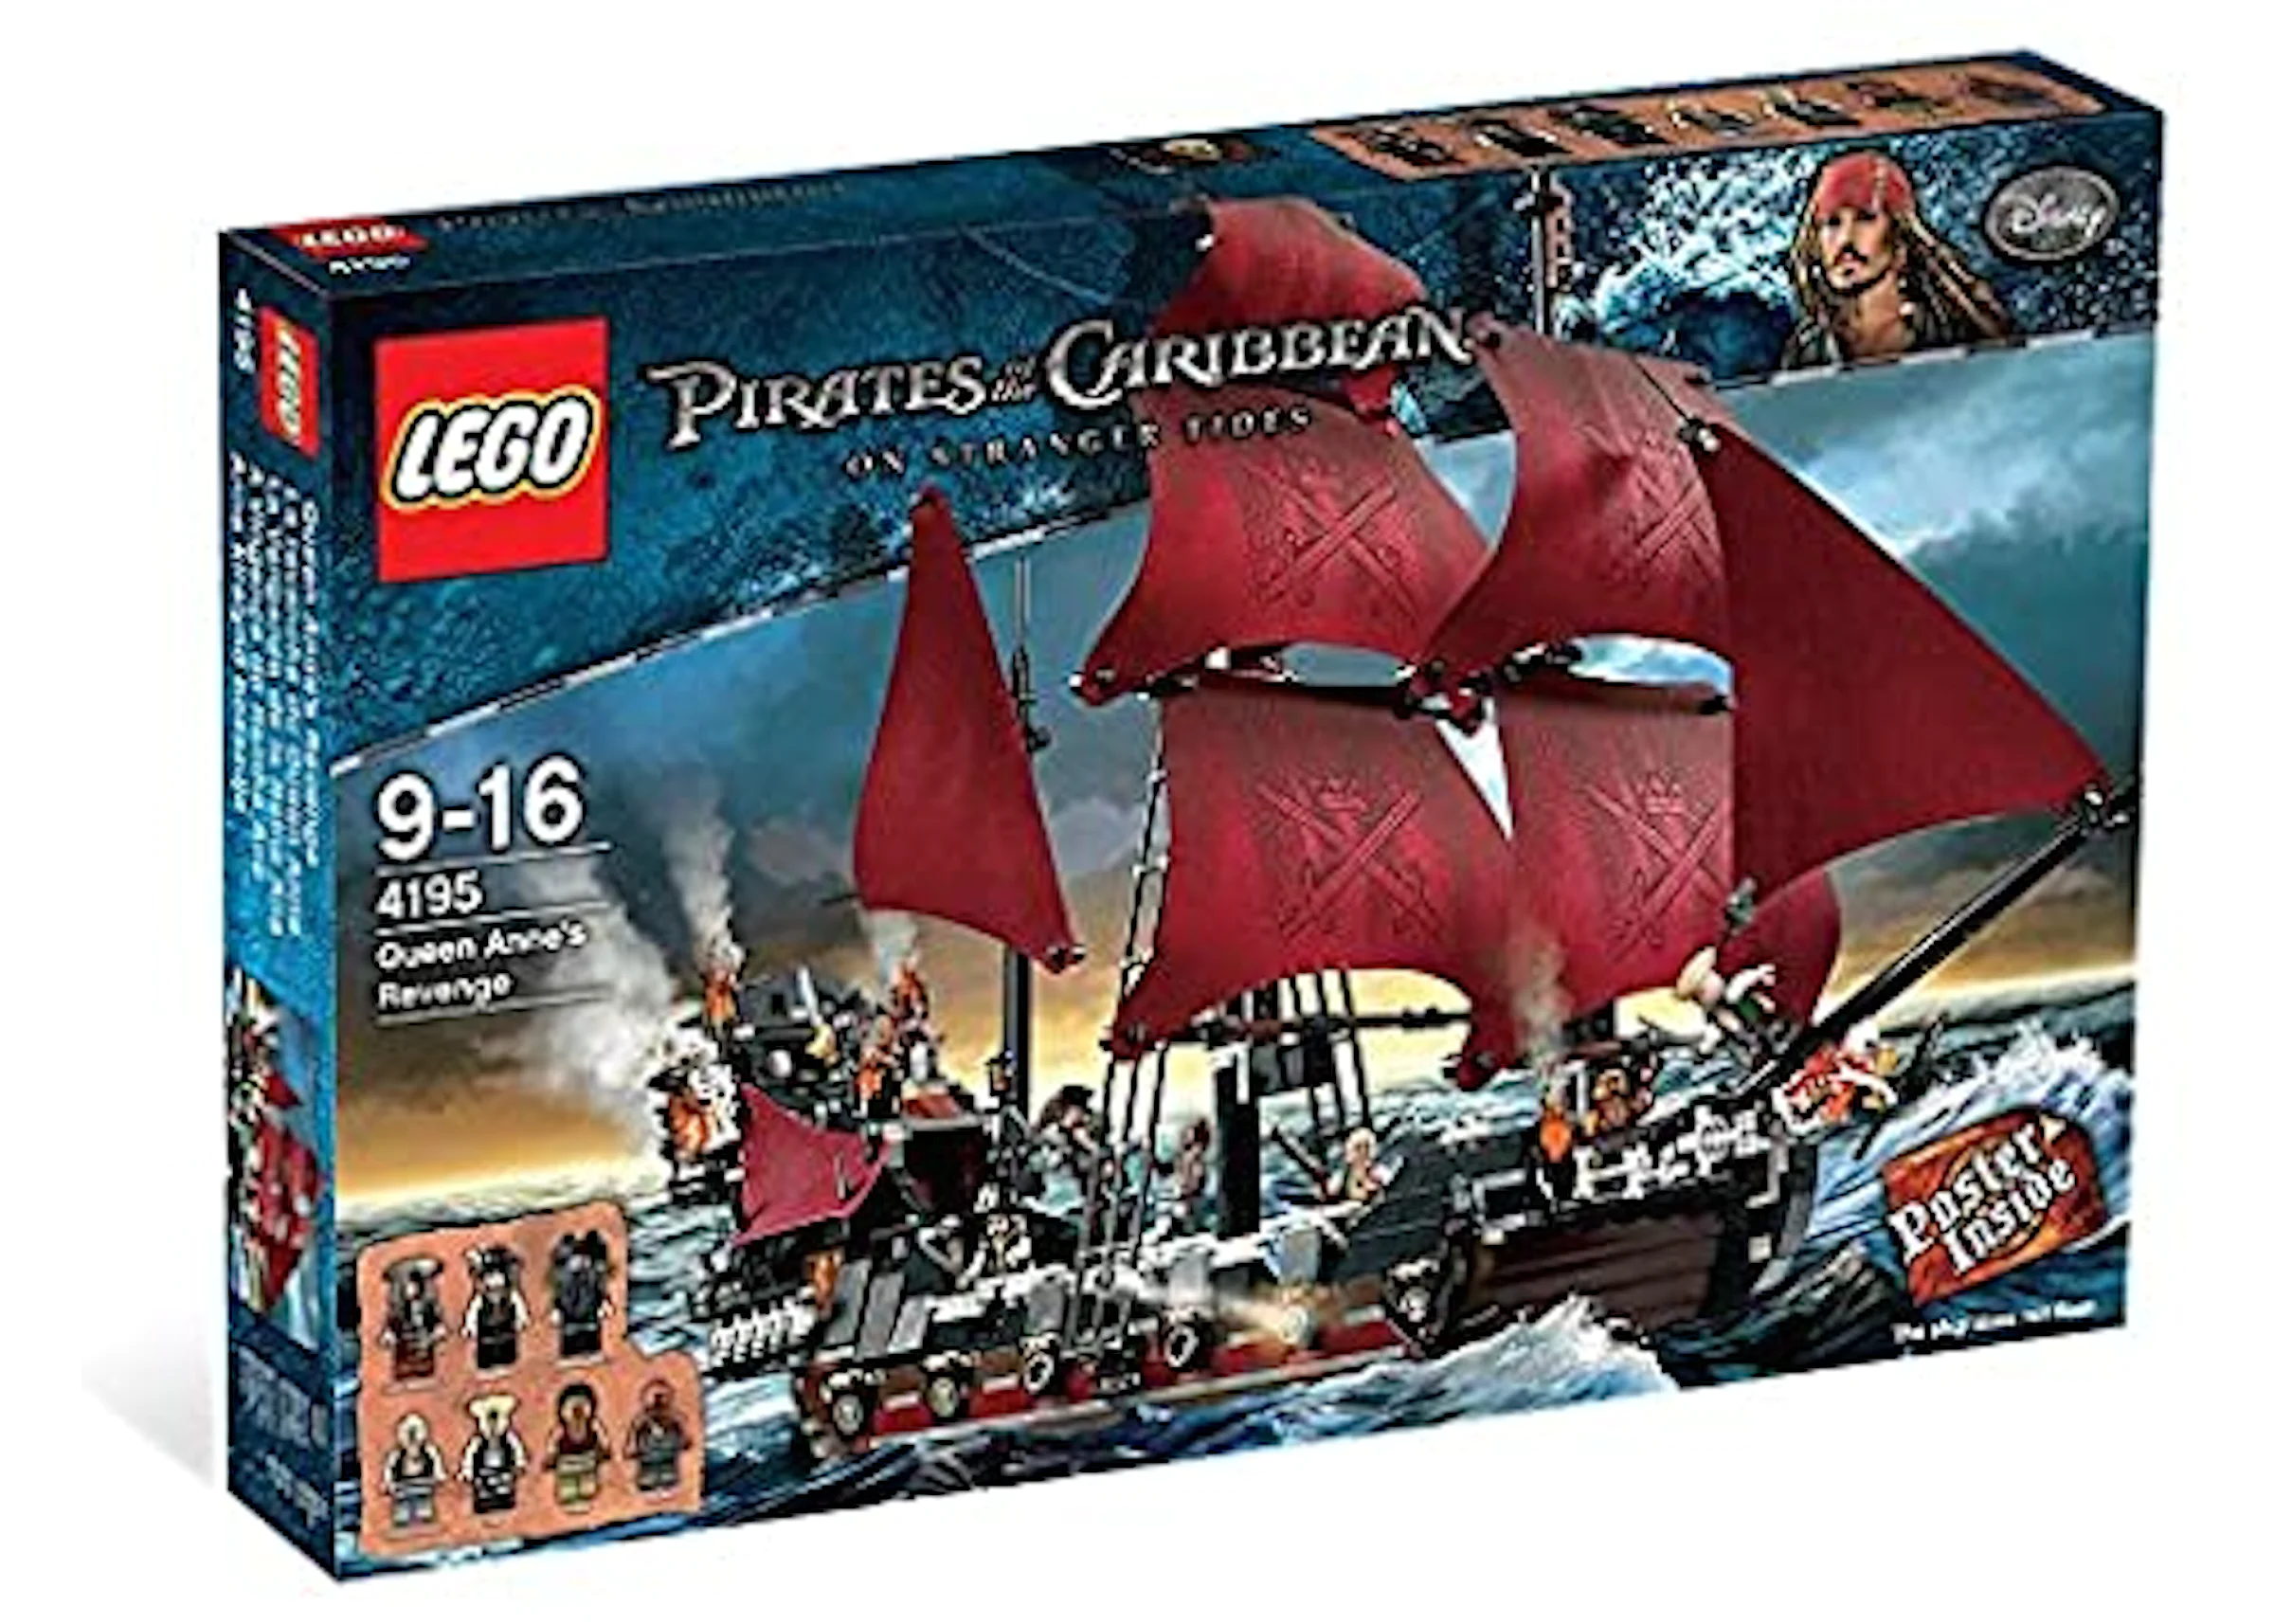 LEGO Pirates of the Caribbean Queen Anne's Revenge Set 4195 - IT